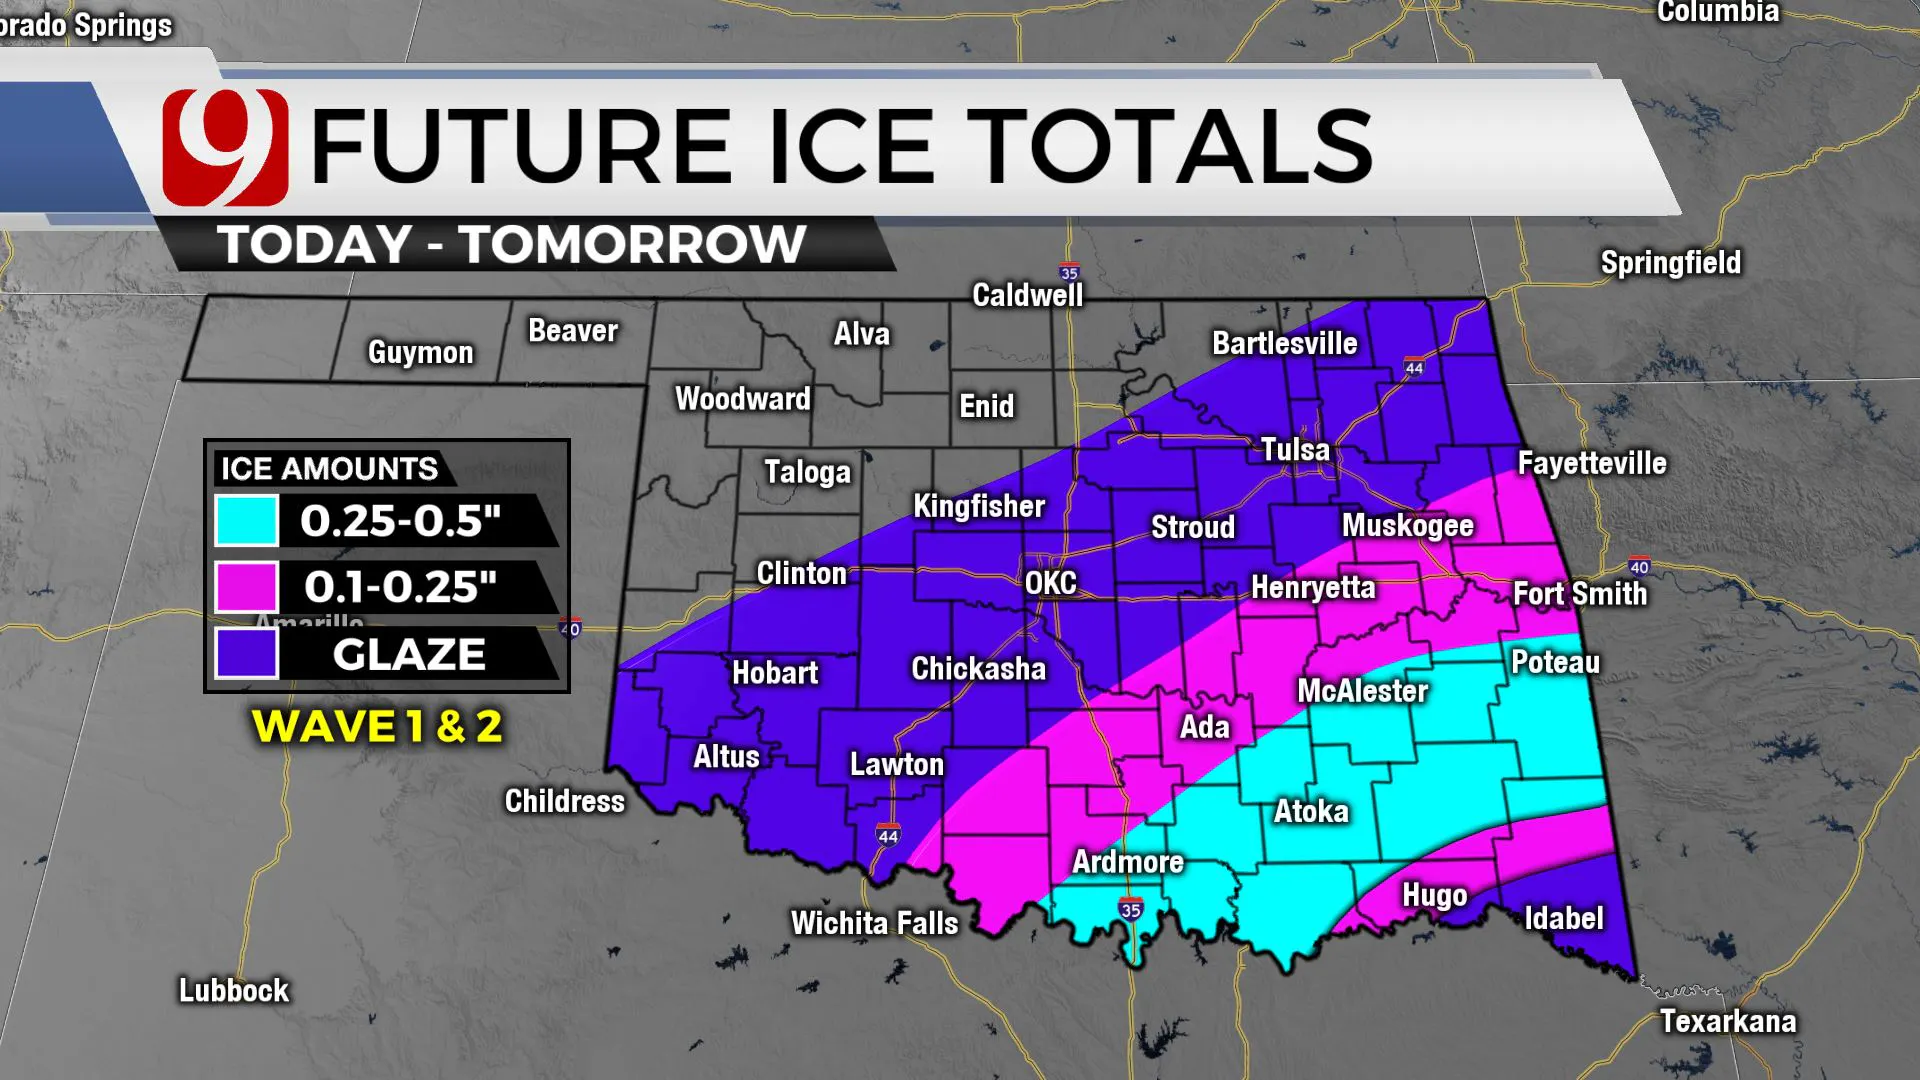 Future ice totals across the state.